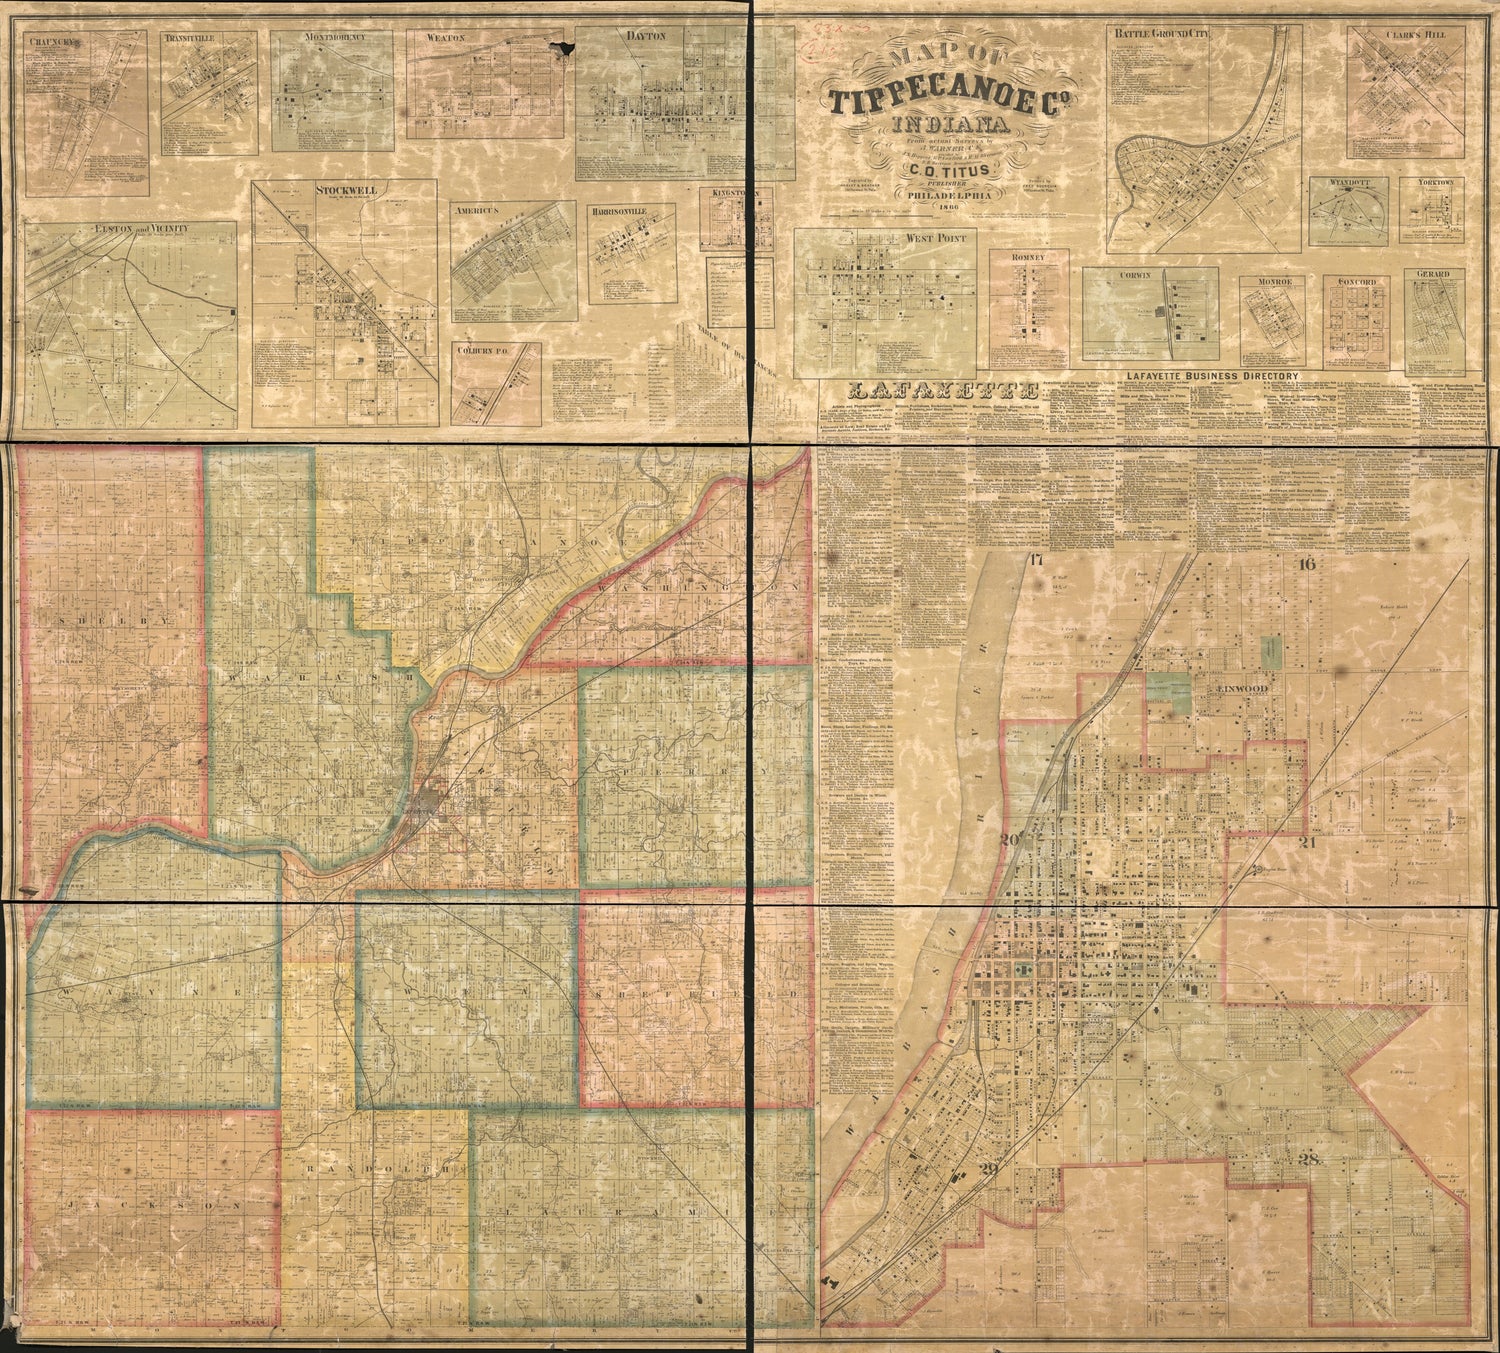 This old map of Map of Tippecanoe Co., Indiana from 1866 was created by A. Warner in 1866